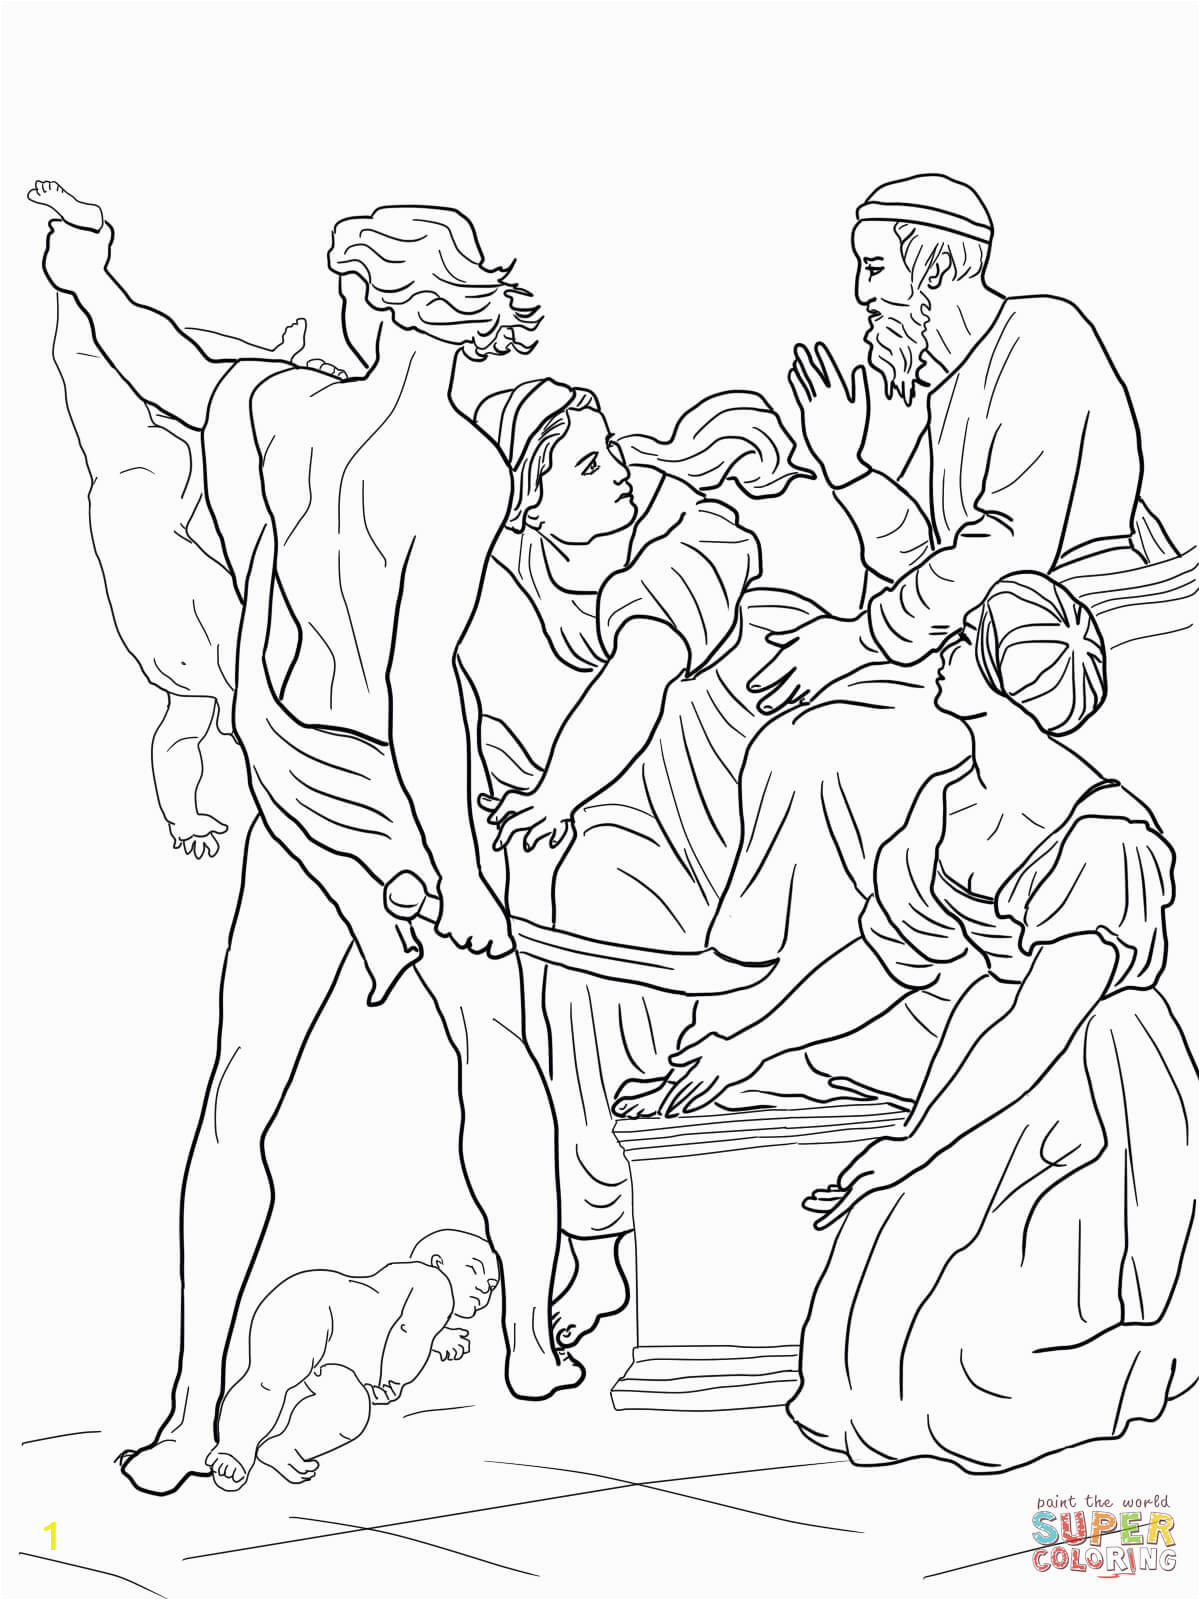 King solomon and the Baby Coloring Pages solomon Threatened to Split the Baby In Half Coloring Page